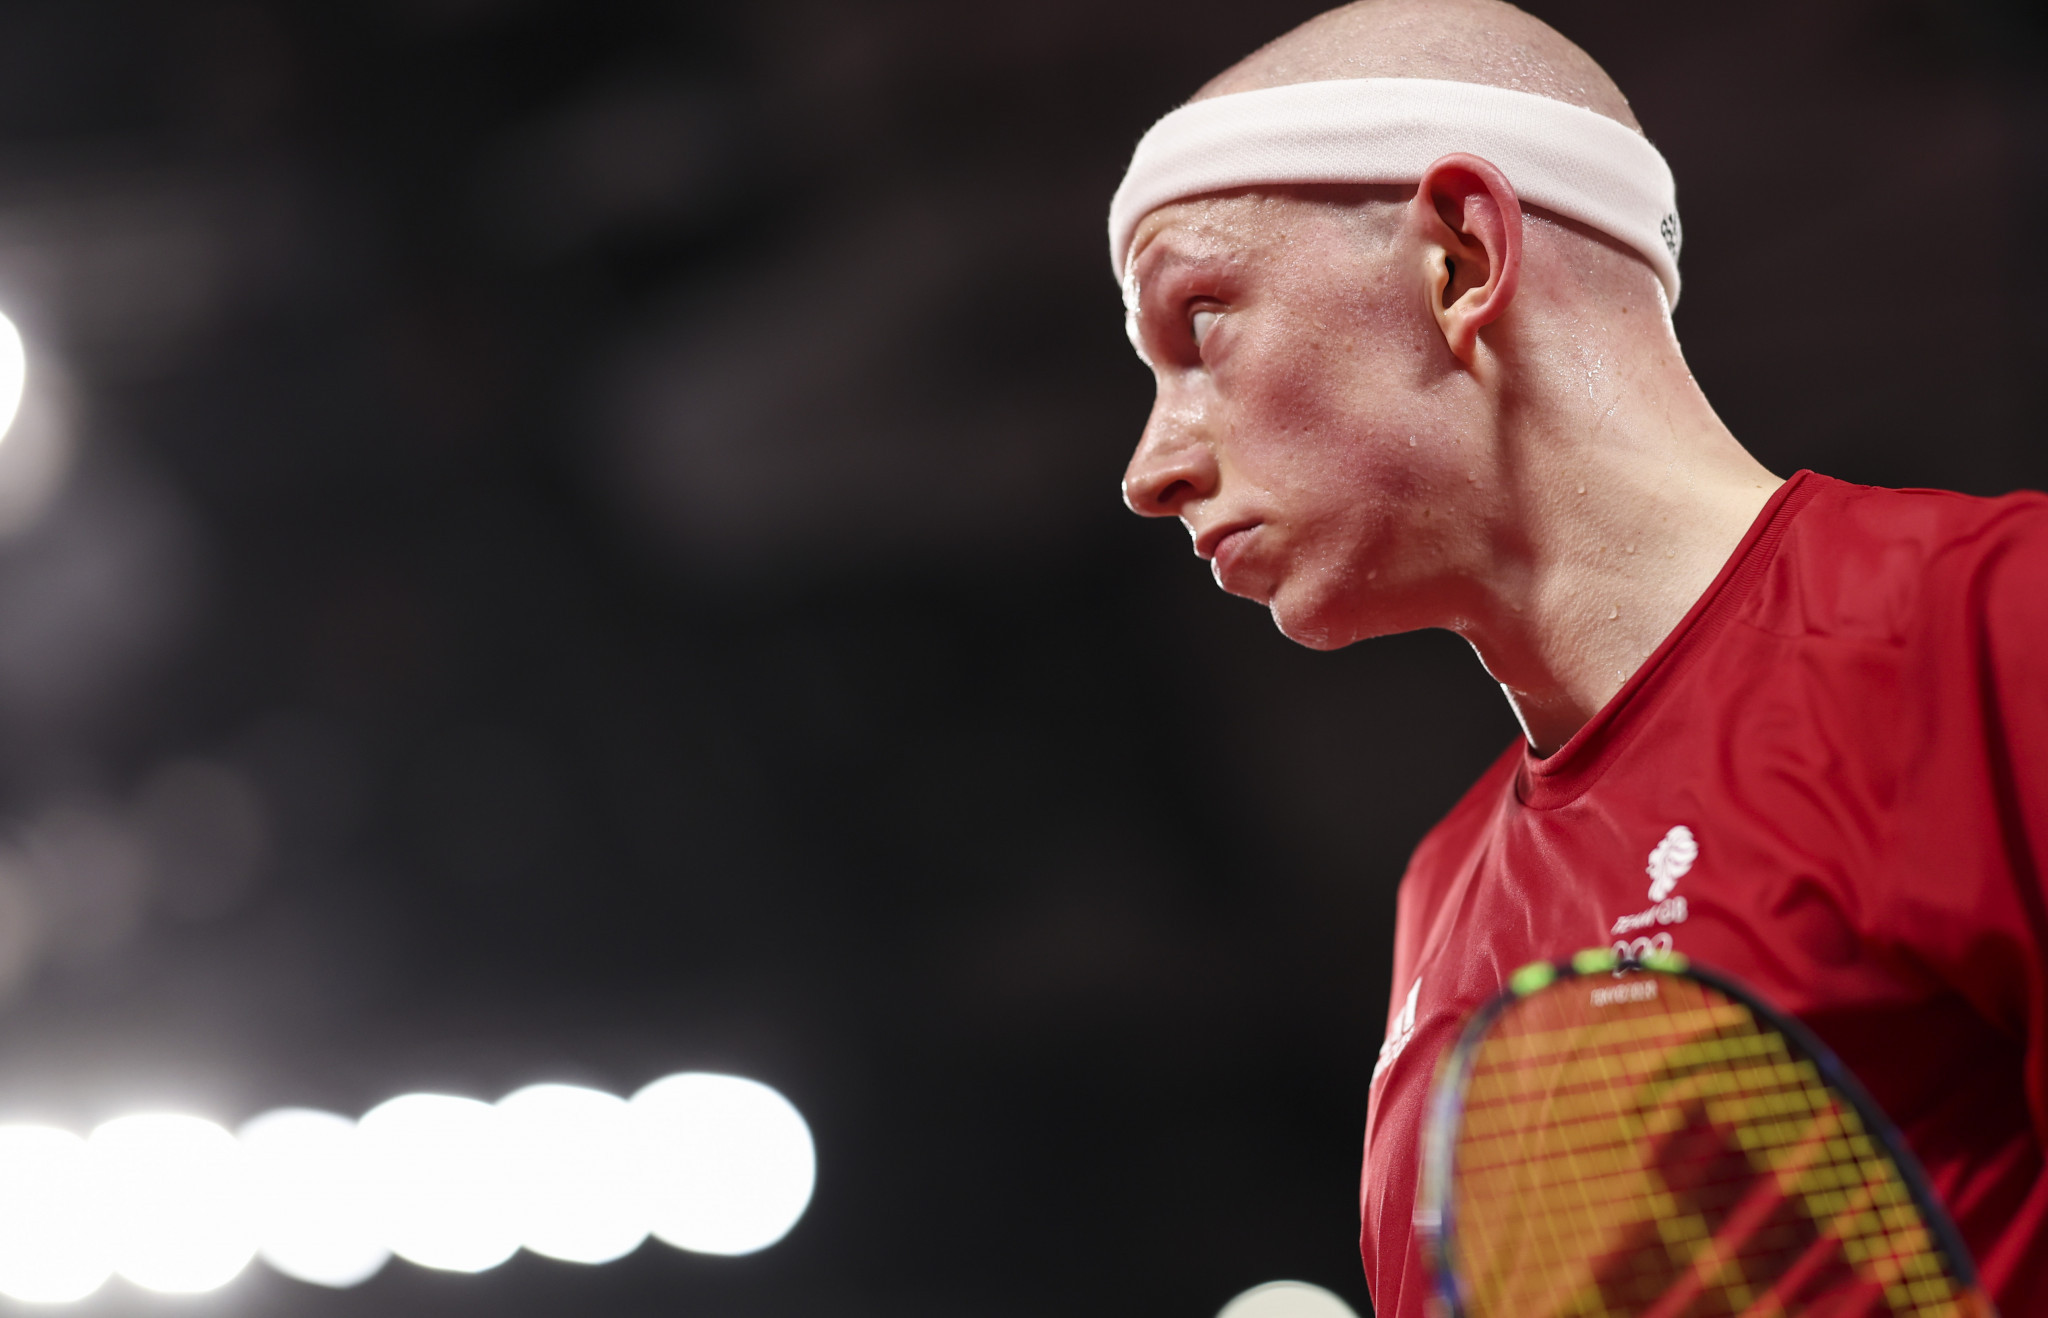 First round matches begin at European Badminton Championships in Madrid